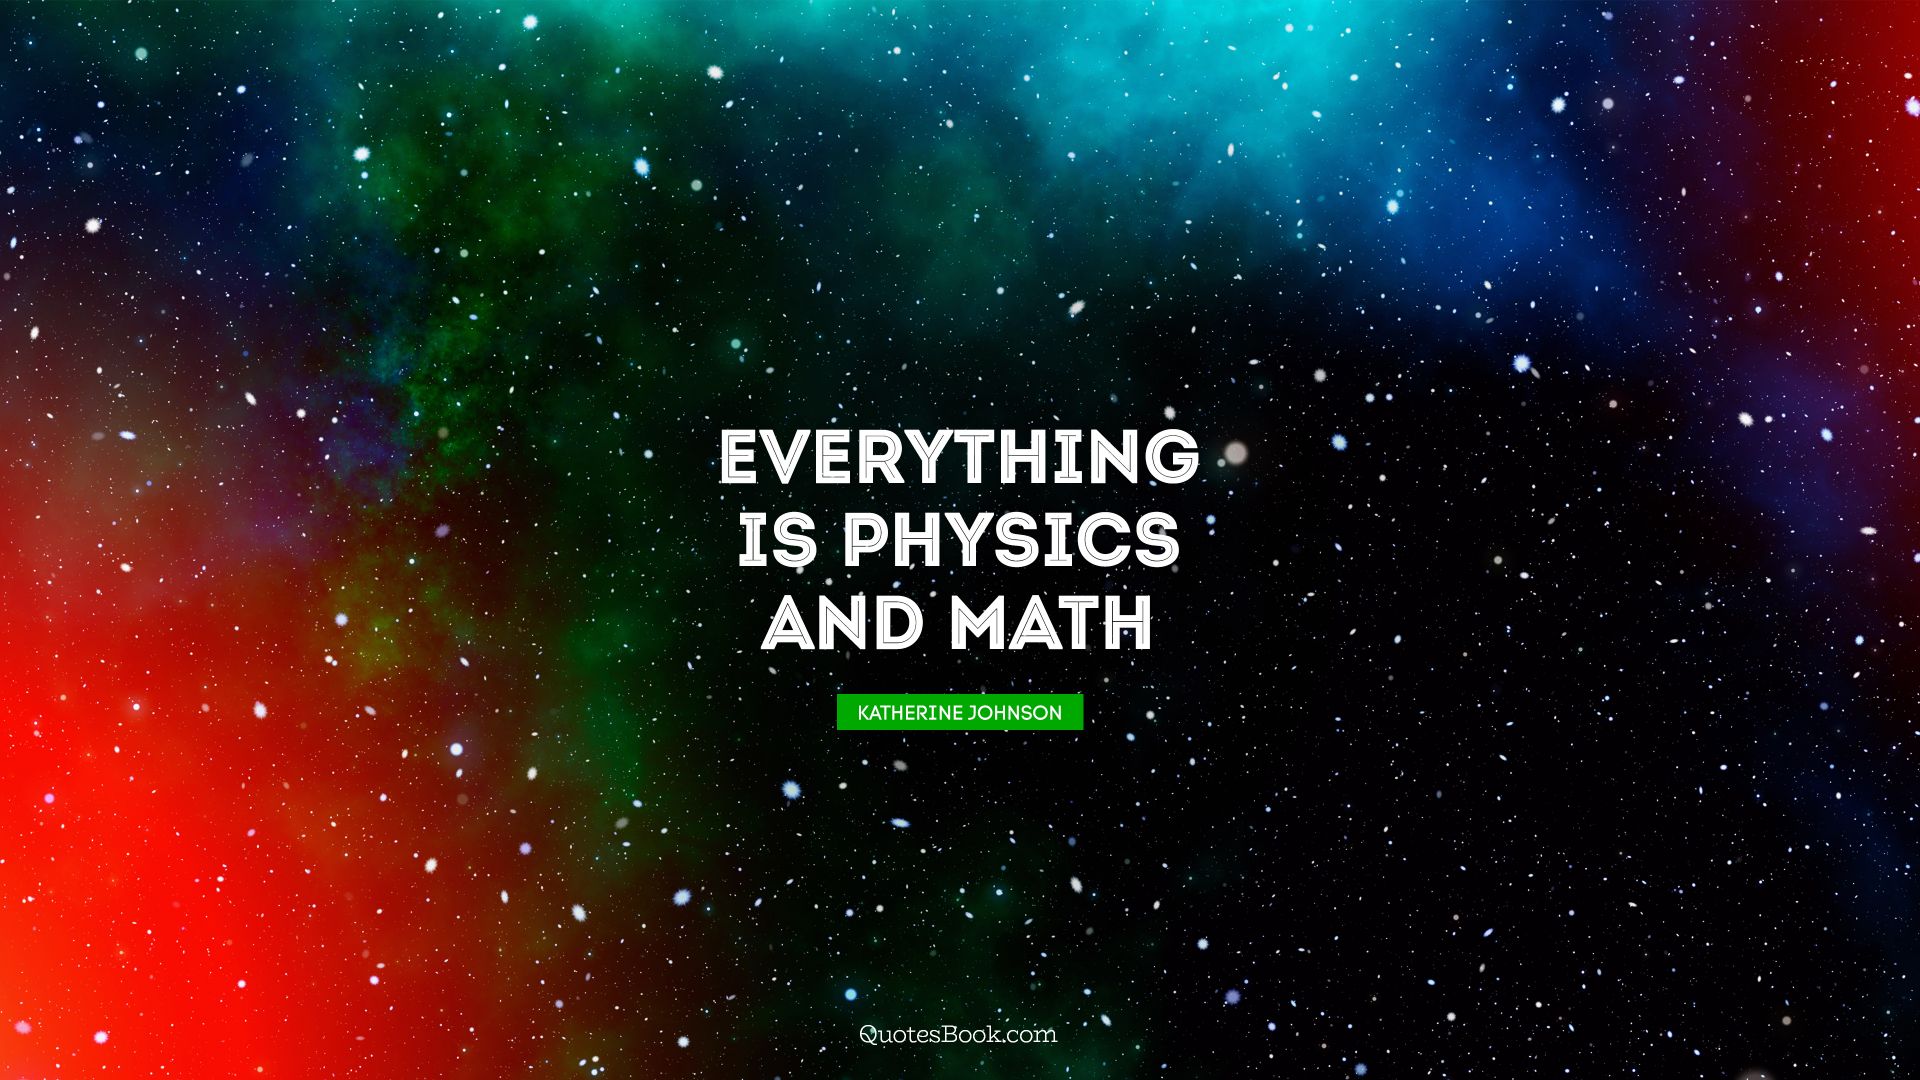 Everything is physics and math. - Quote by Katherine Johnson